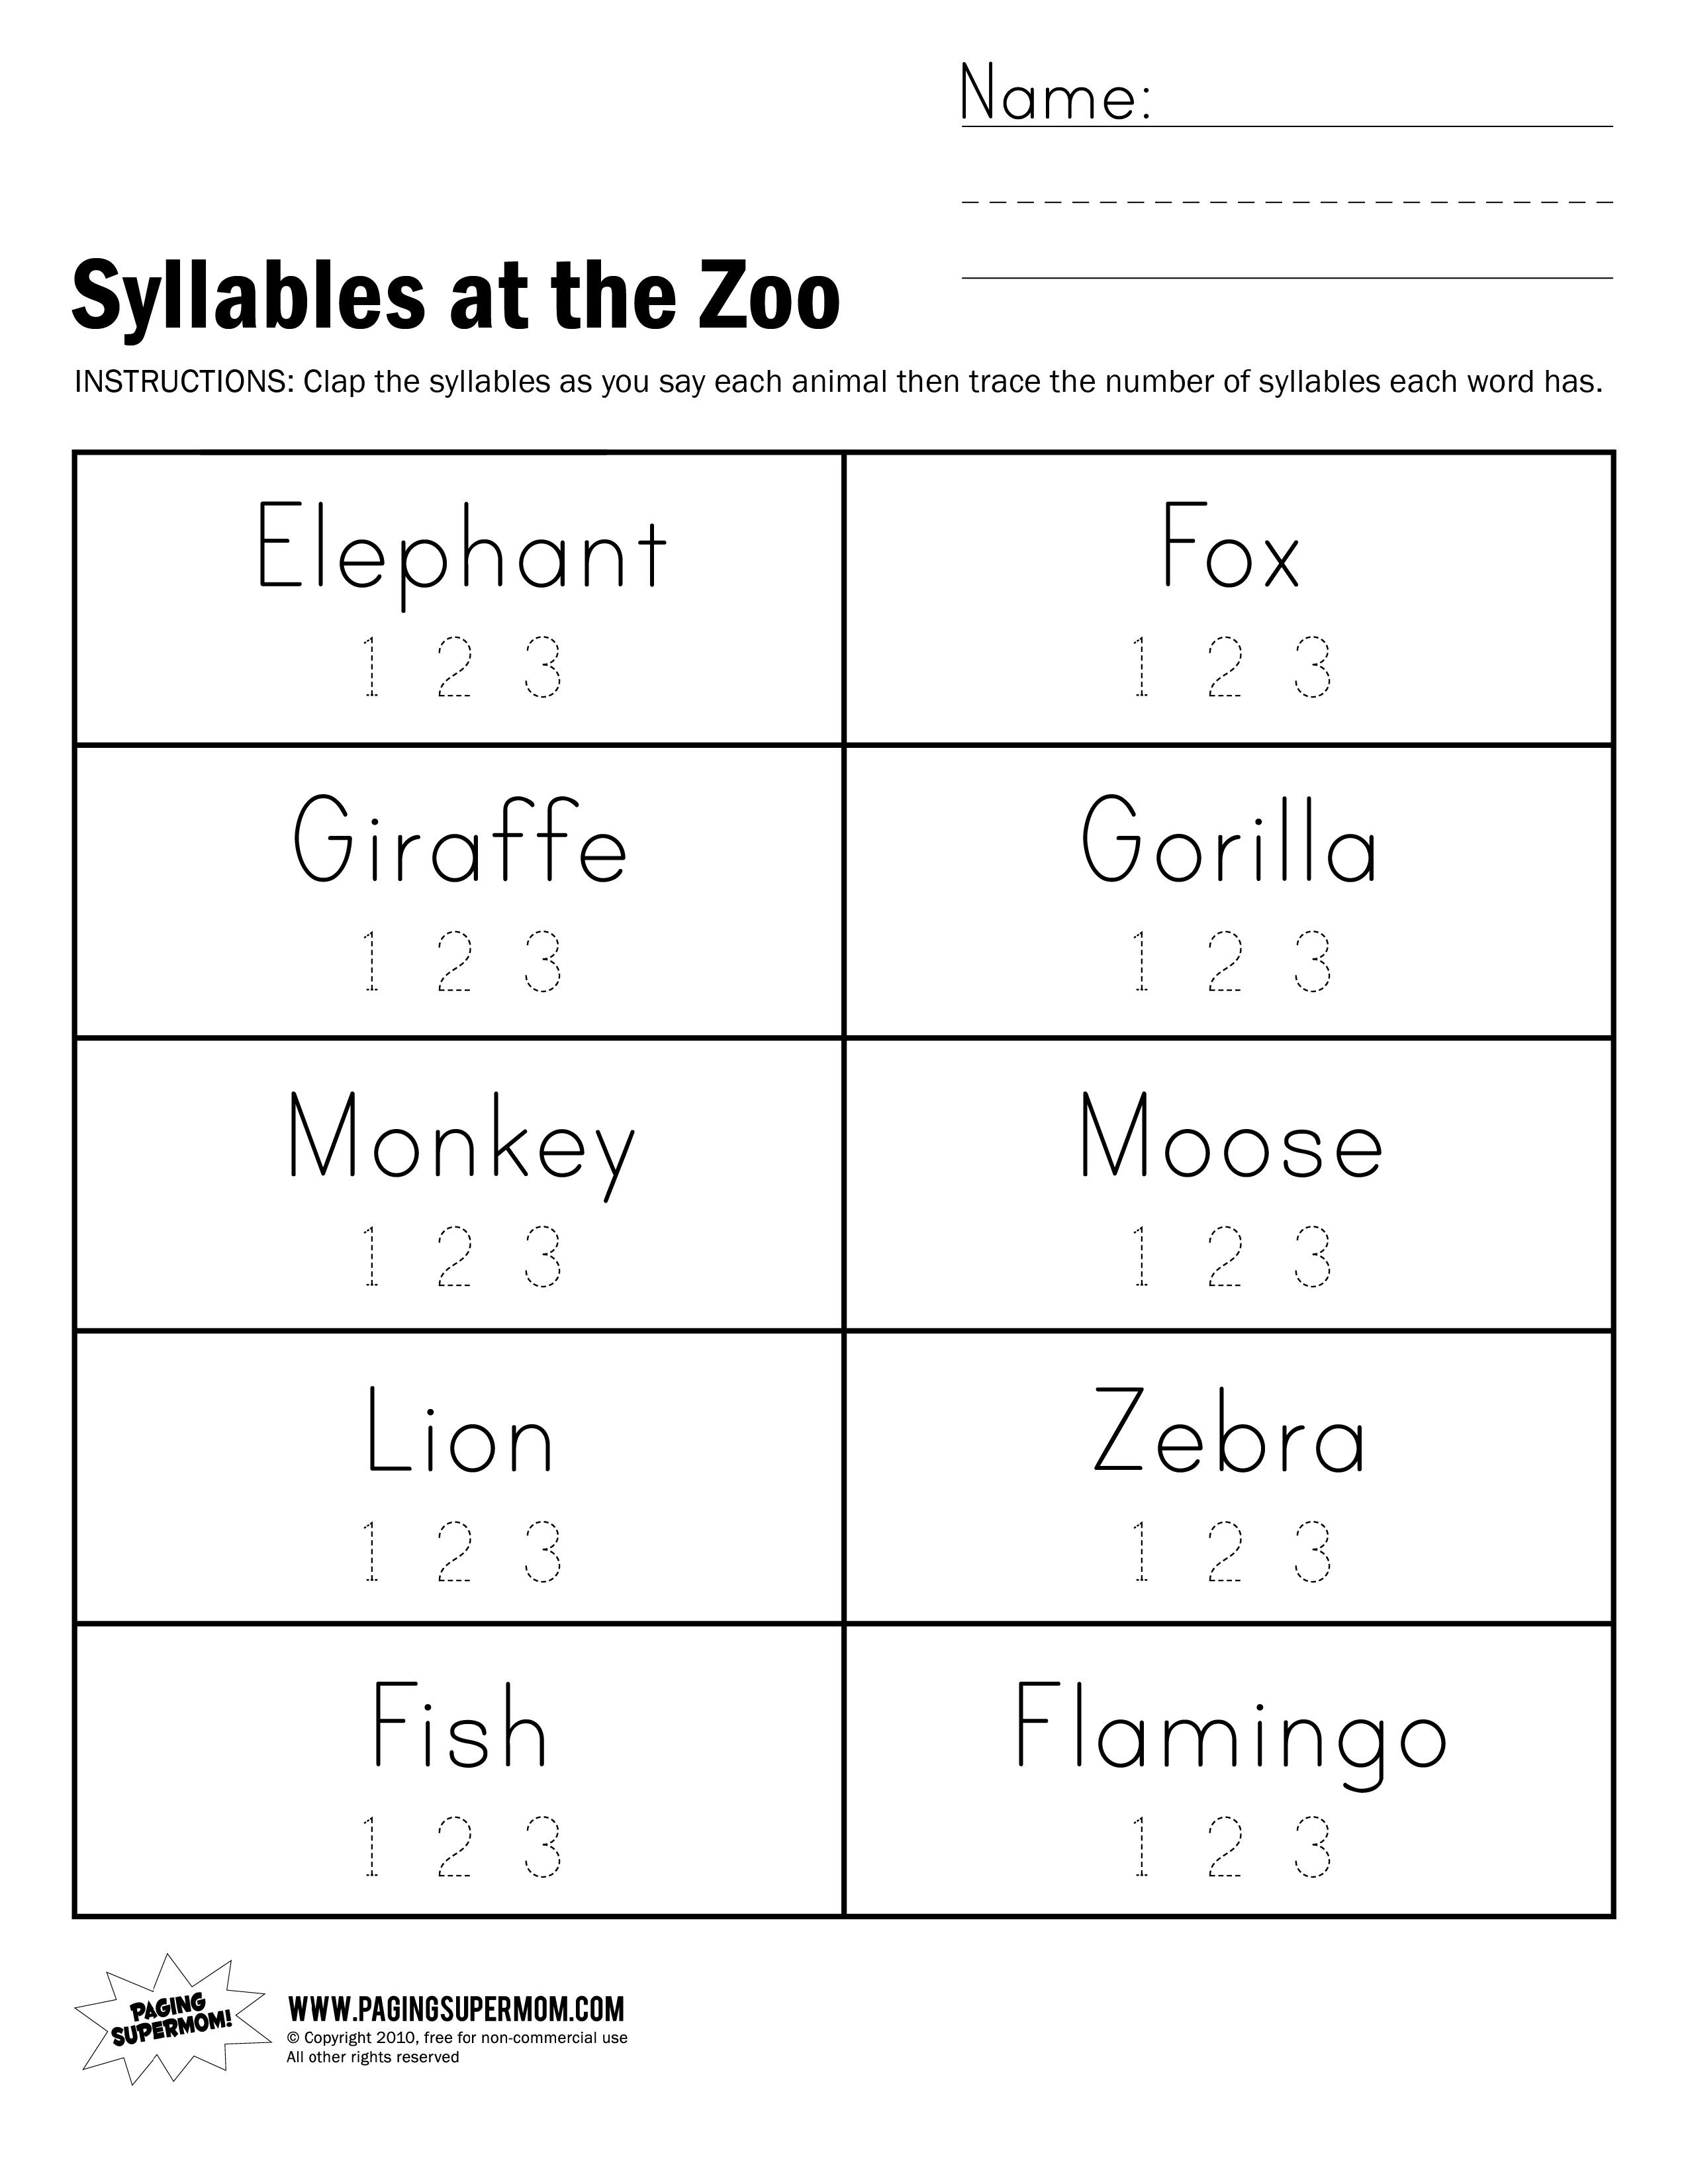 Syllables At The Zoo Worksheet - Free Printable Open And Closed Syllable Worksheets